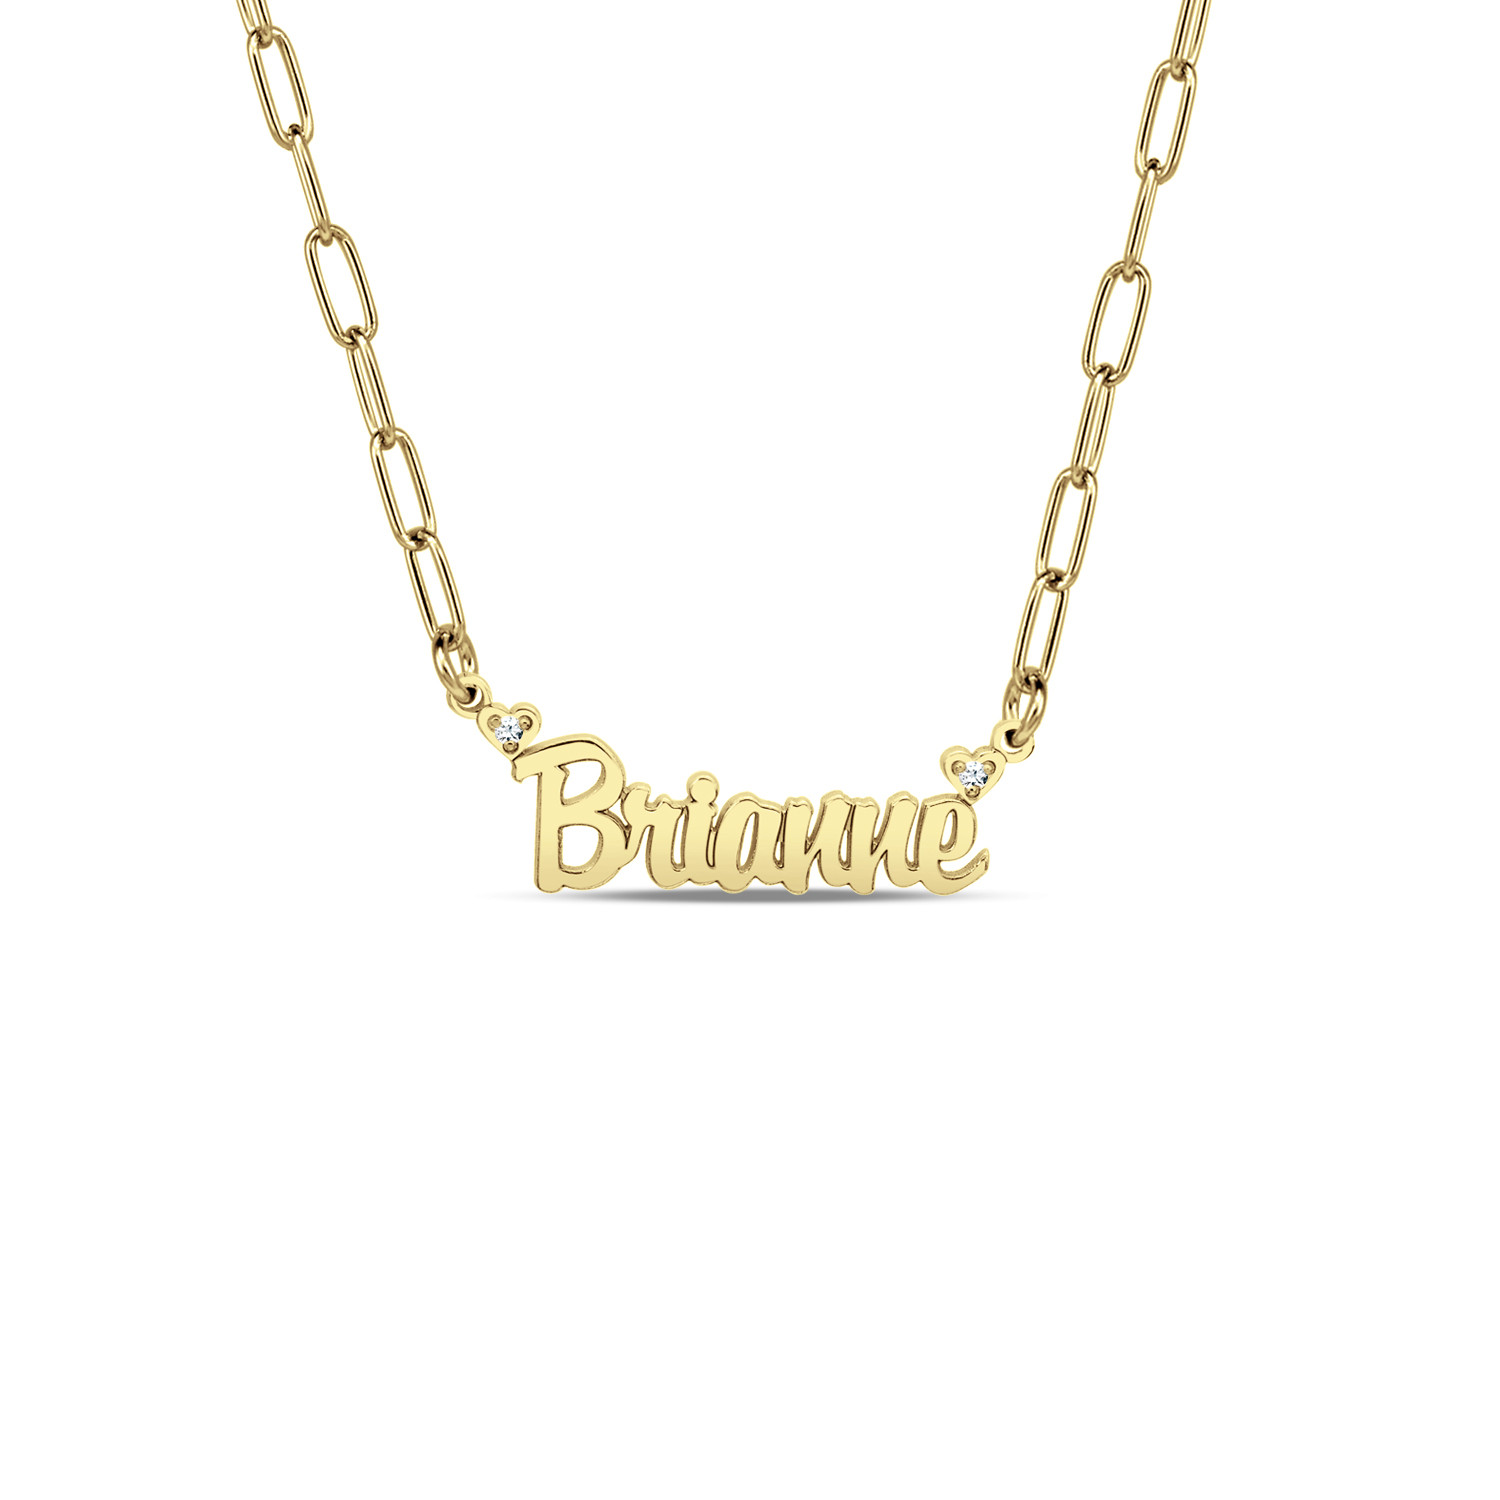  Dia Accent Name Pers Necklace